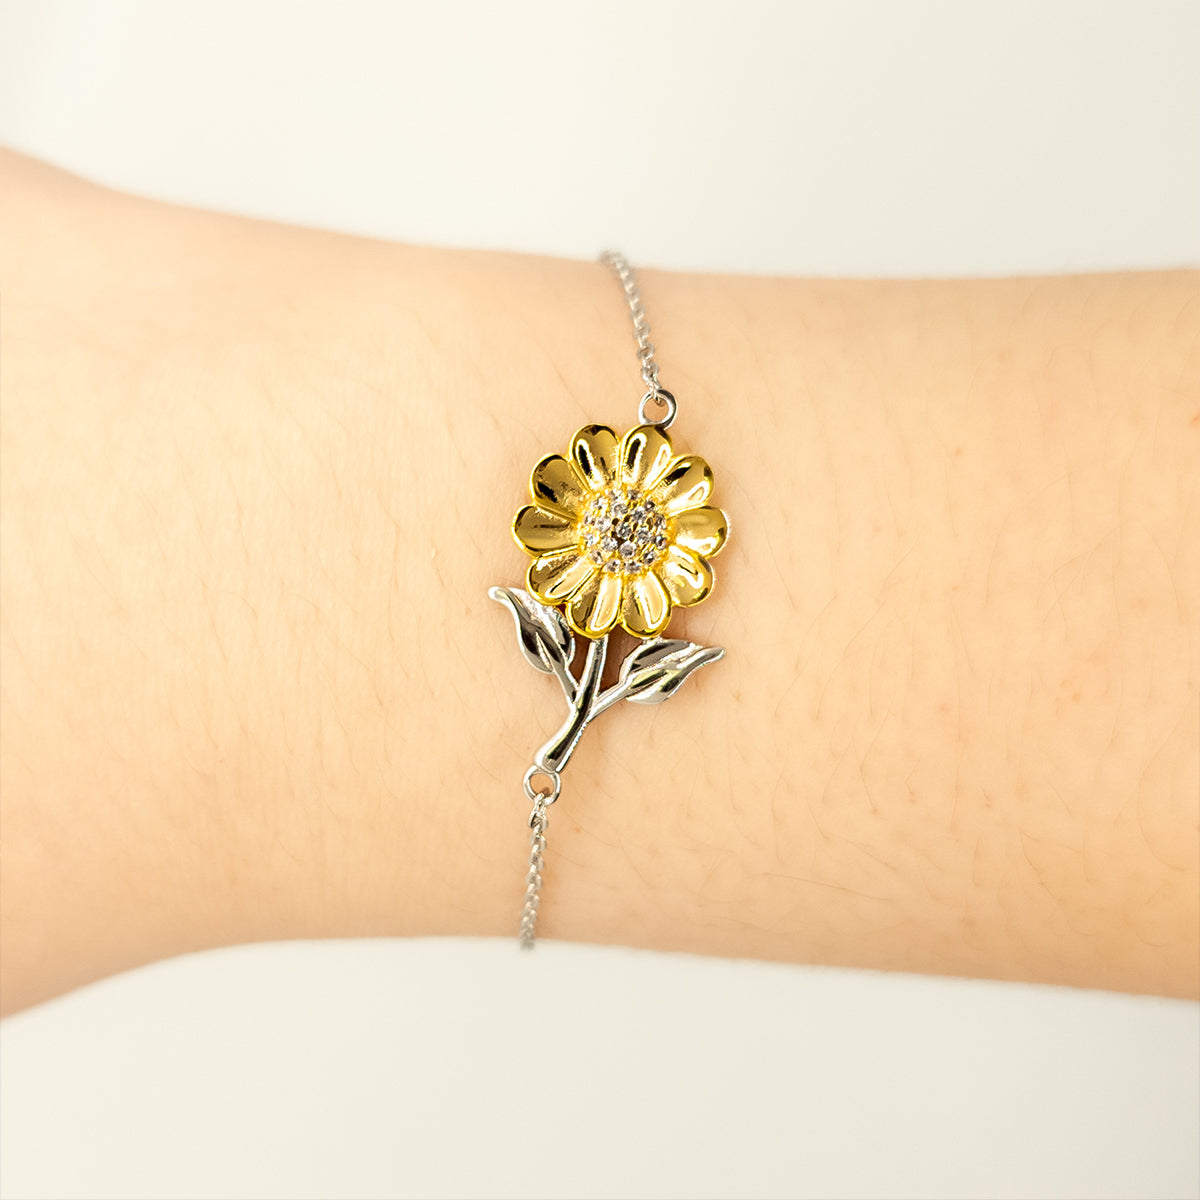 Niece Motivational Gifts from Auntie, Remember to never give up no matter what, Inspirational Birthday Sunflower Bracelet for Niece